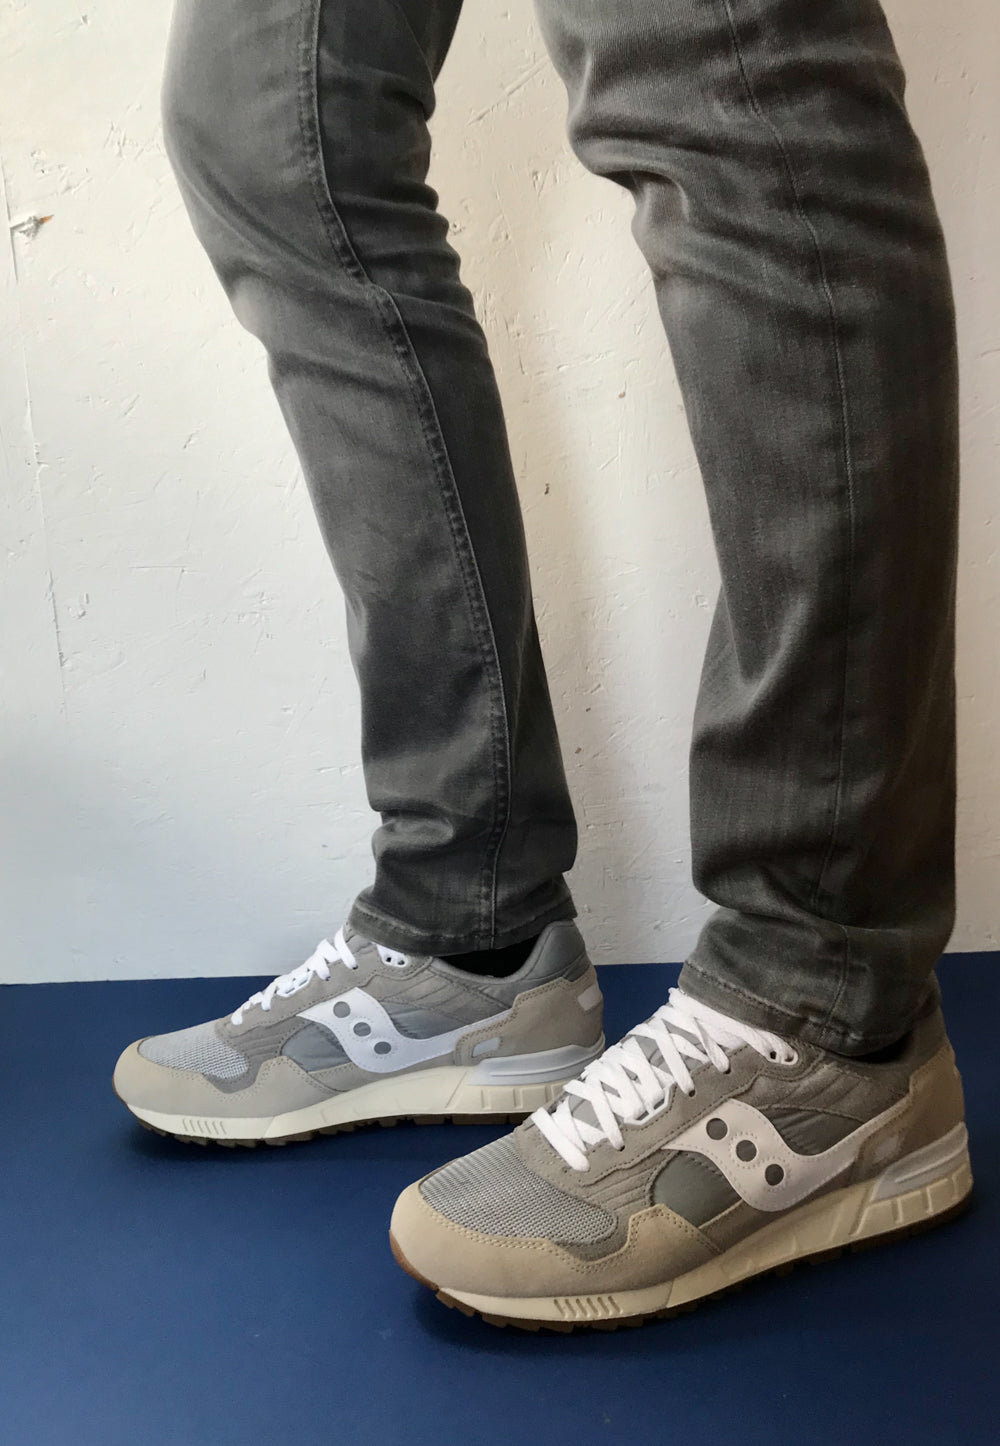 saucony shadow jeans